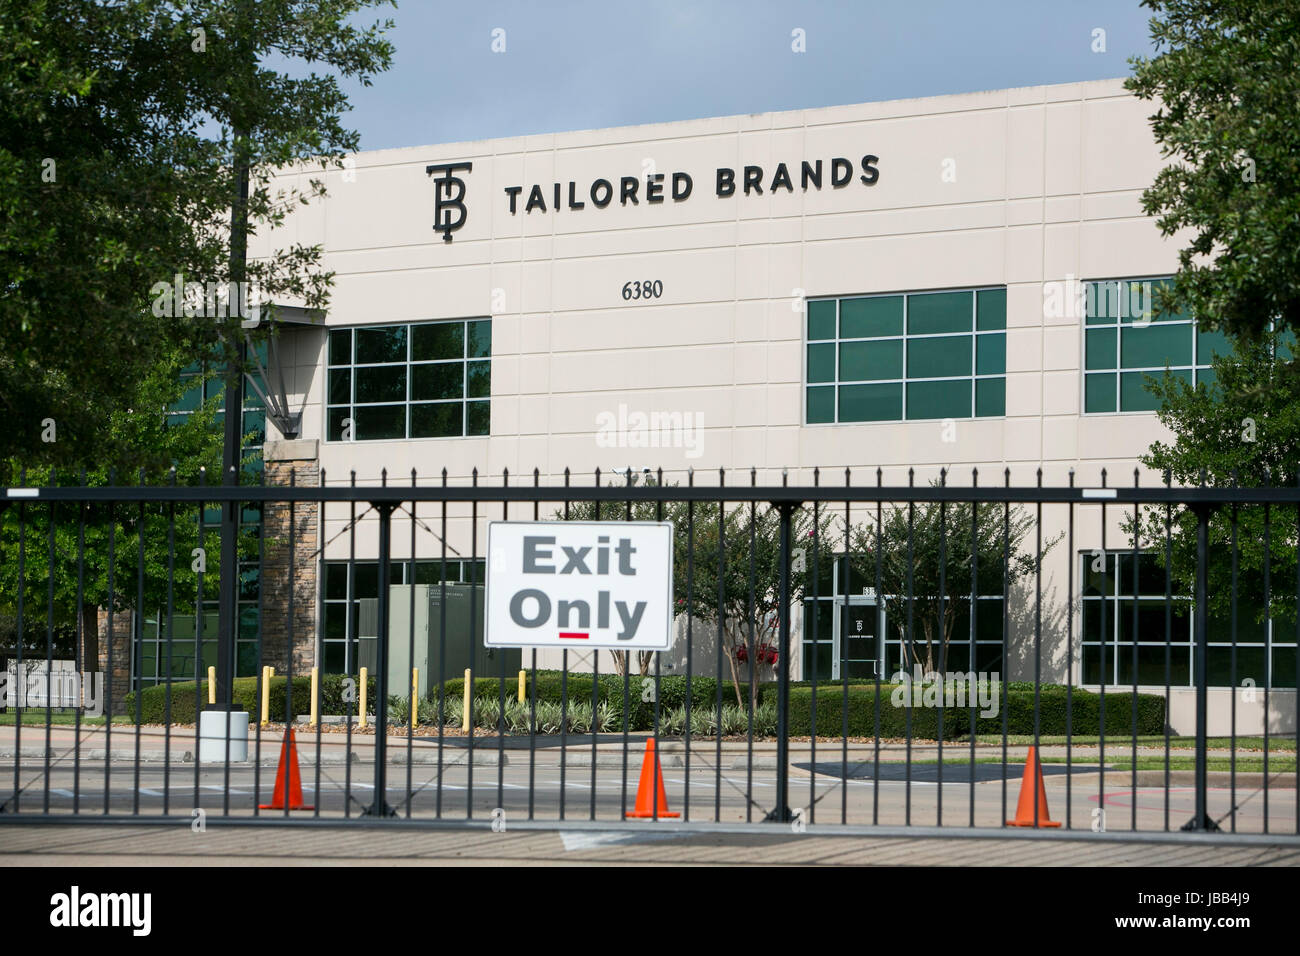 A logo sign outside of the headquarters of Tailored Brands, Inc., the parent company of Men's Wearhouse and JoS. A. Bank Clothiers, in Houston, Texas, Stock Photo